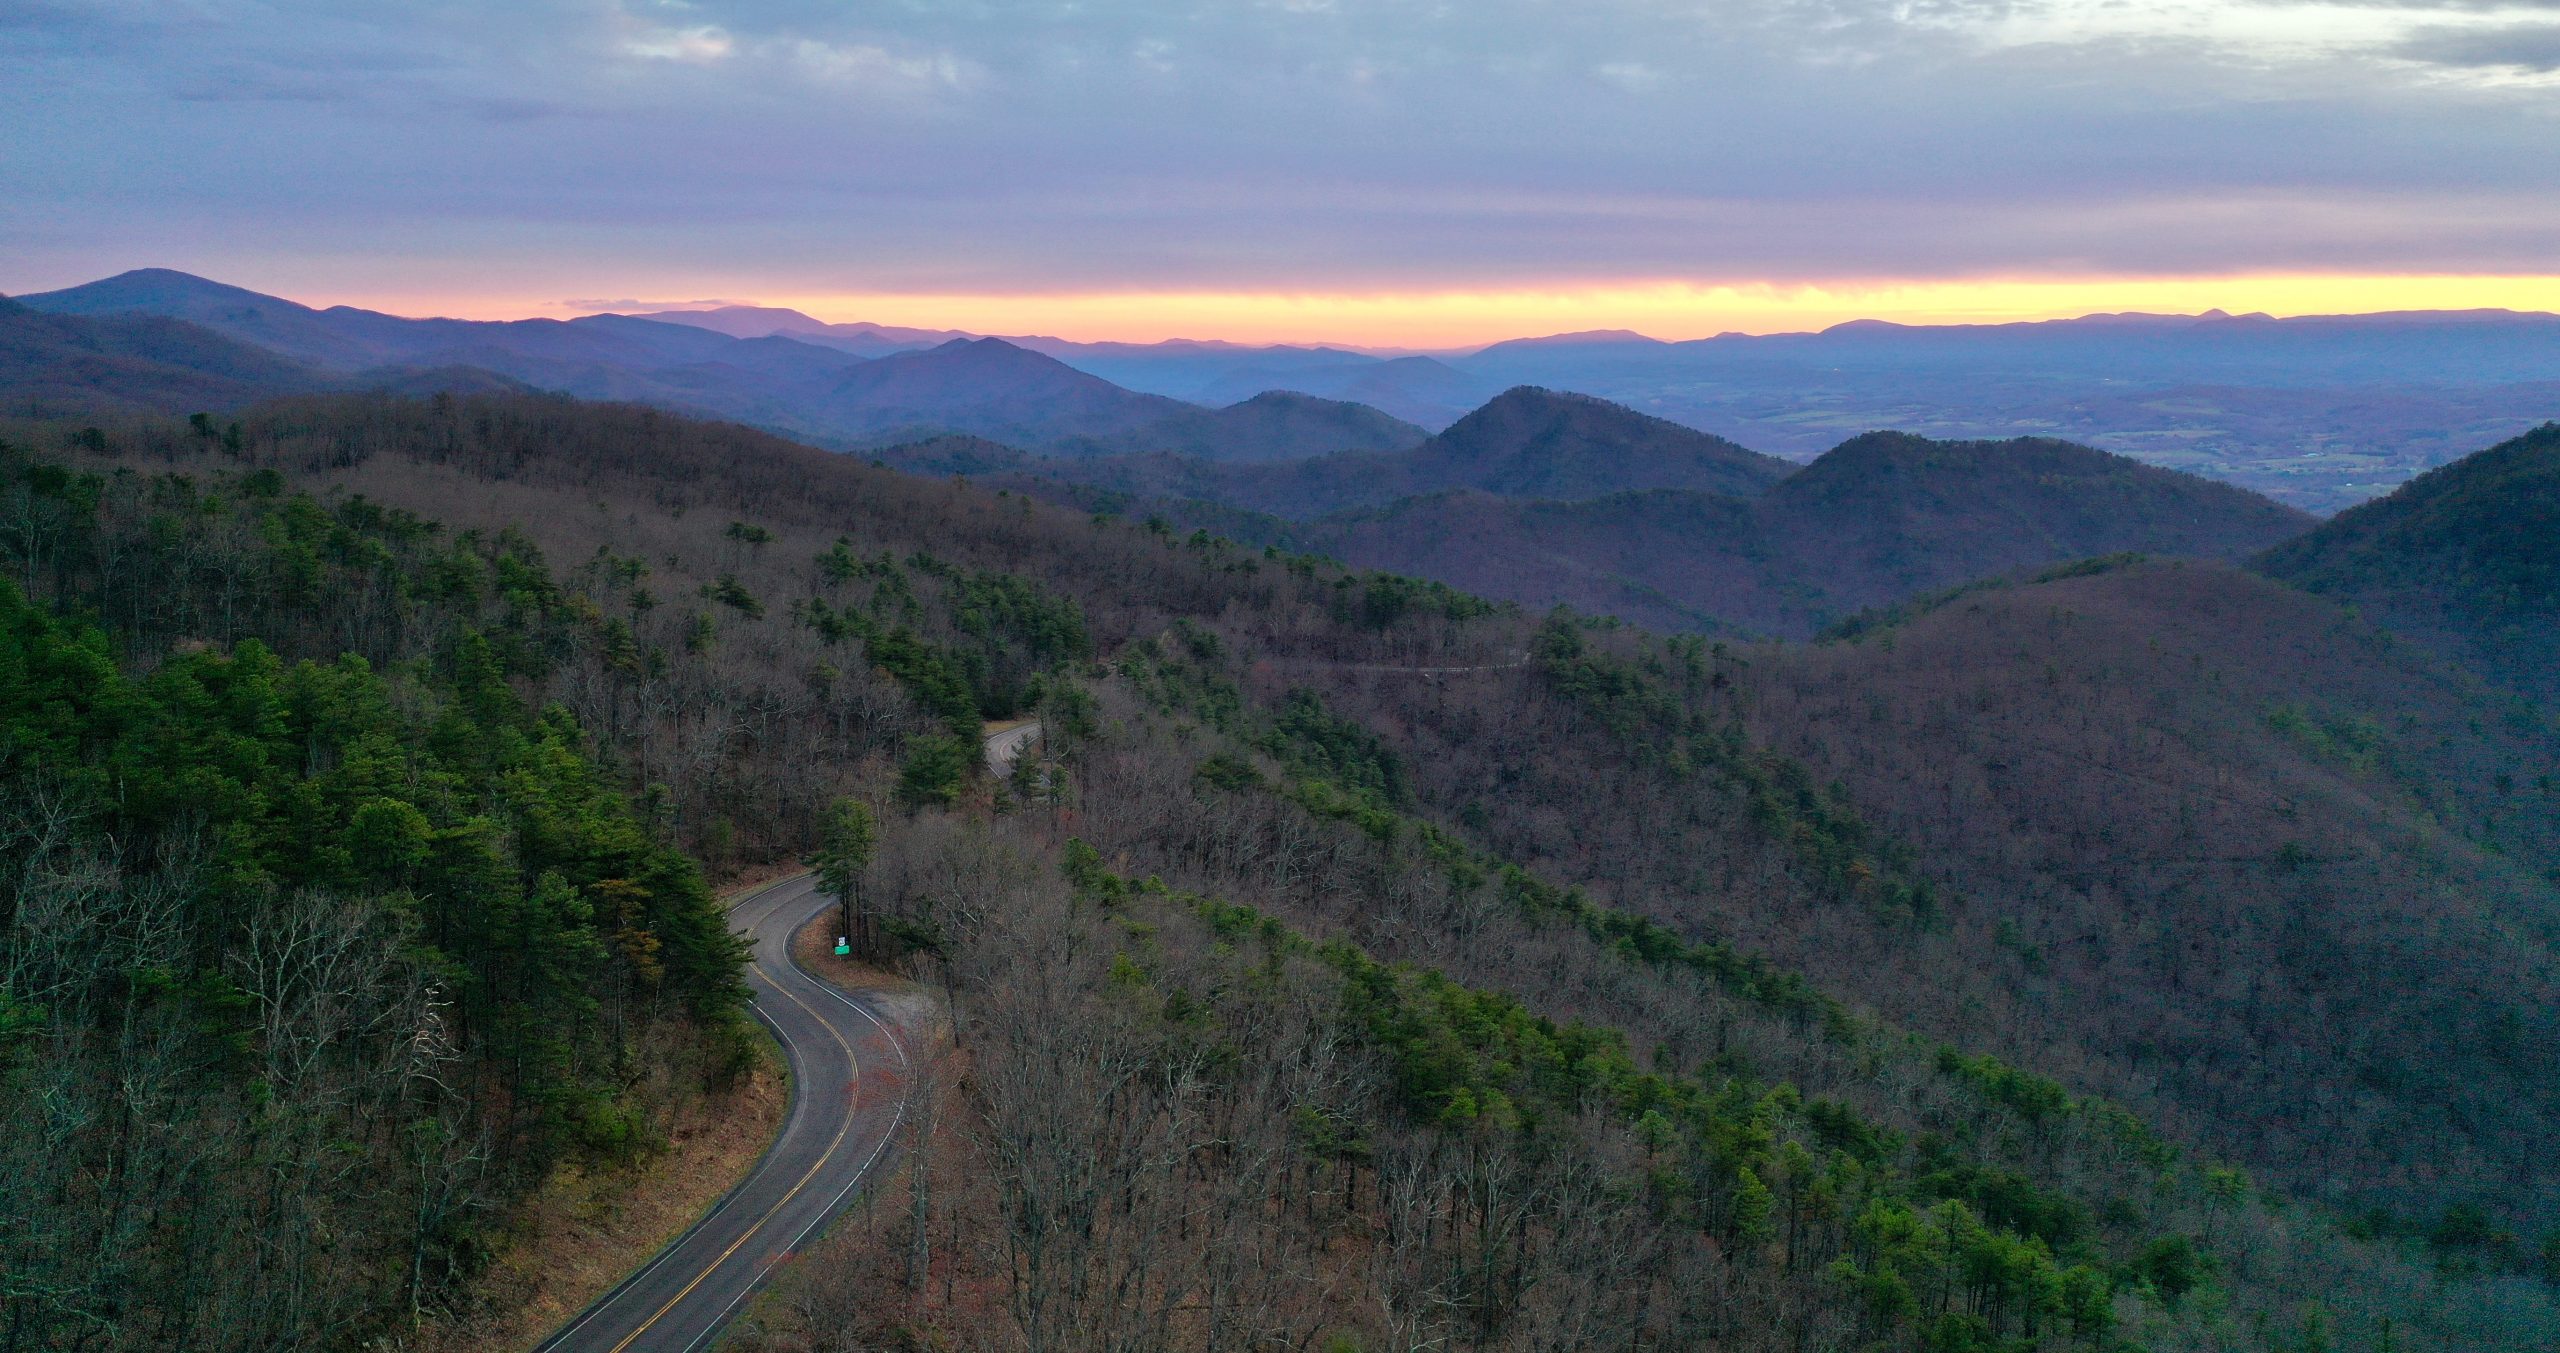 Haywood County has 13 Peaks above 6,000ft